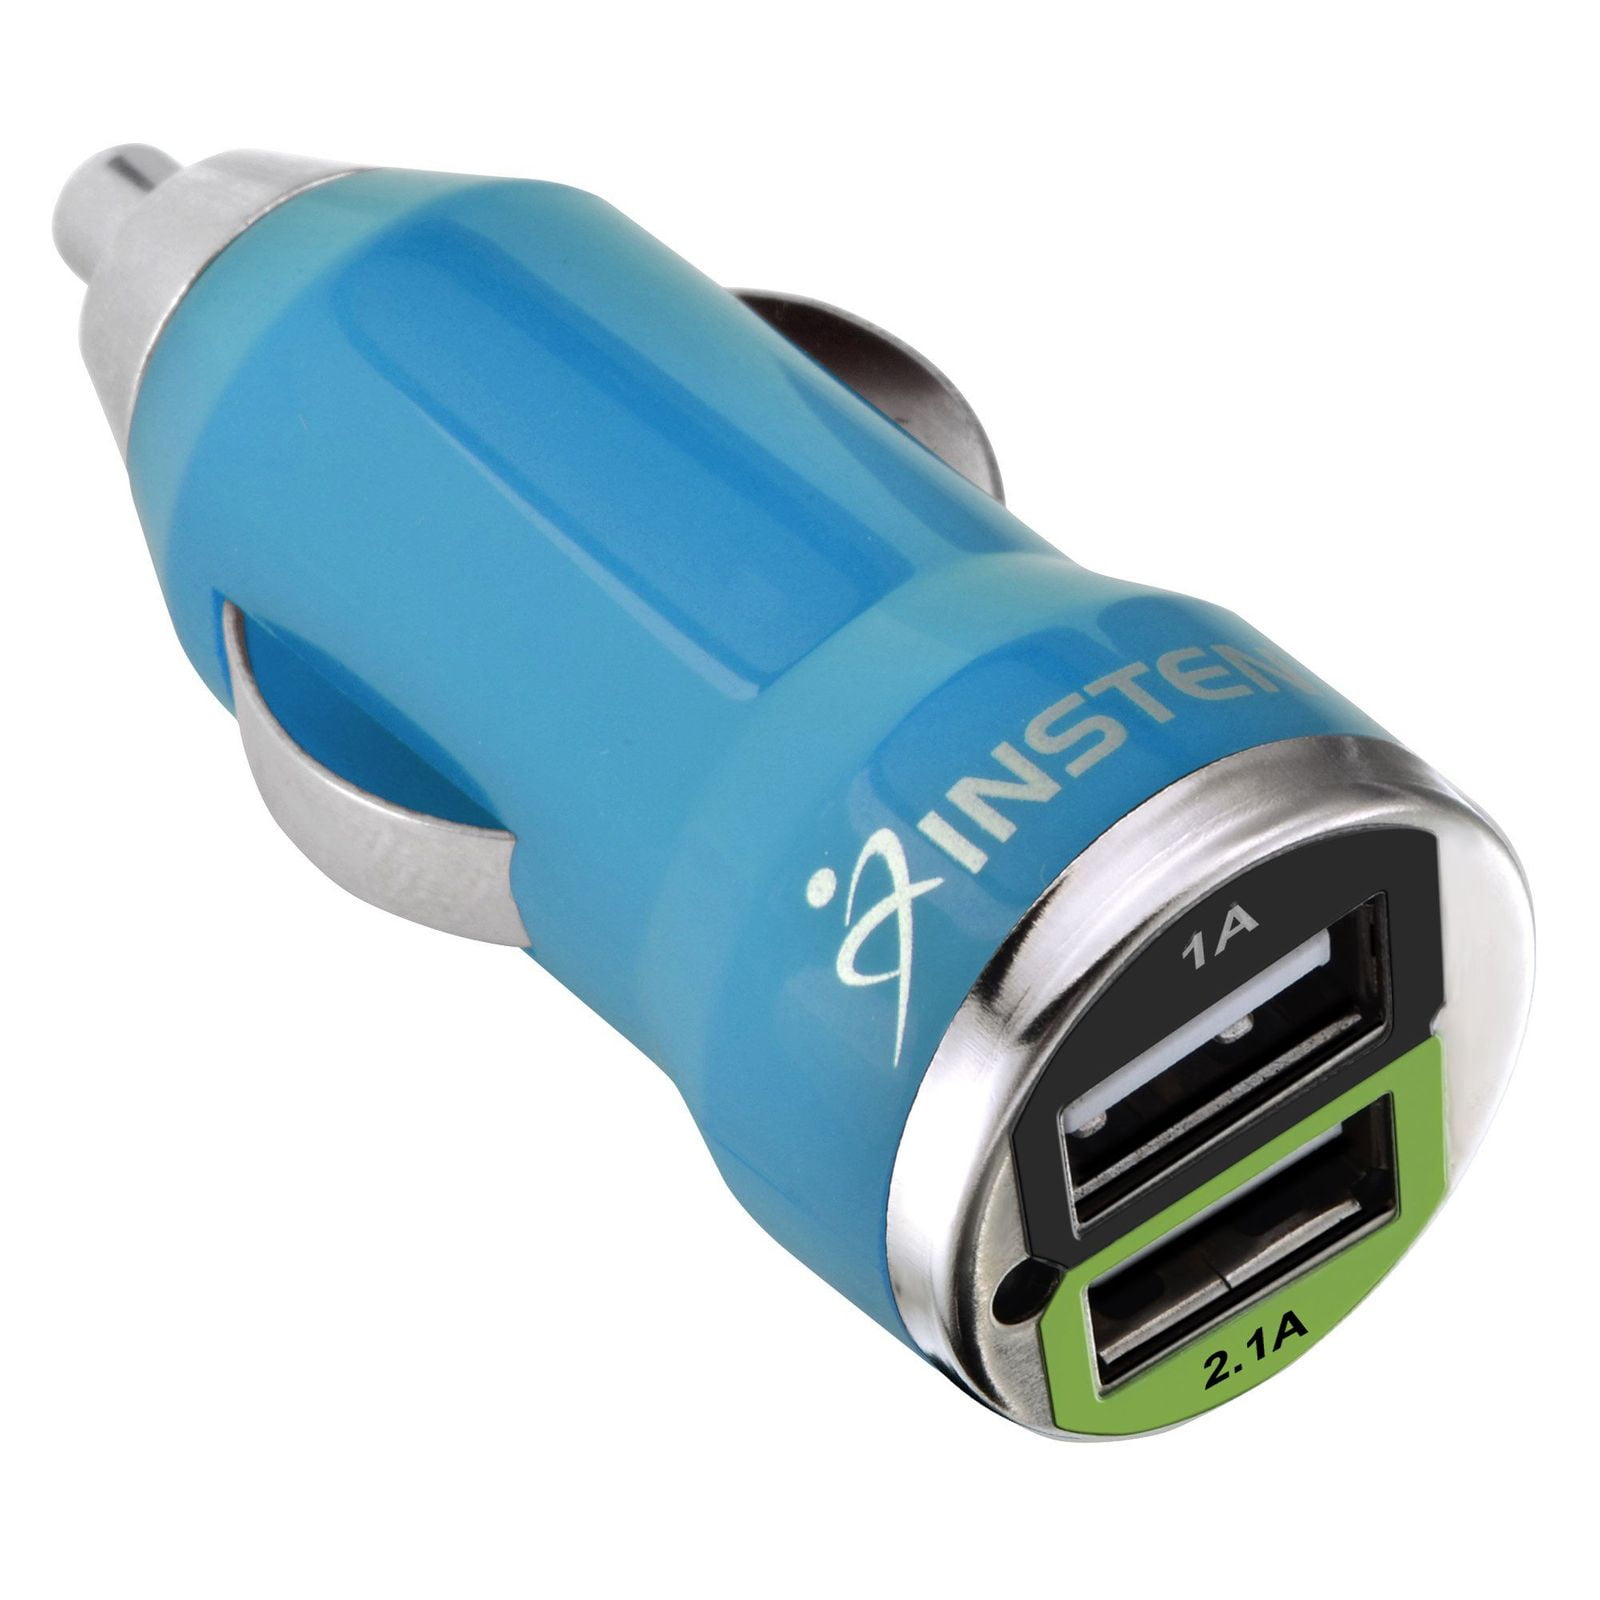 Insten 2-Port Dual USB Maxiam 2.1A Car Charger Adapter for iPhone